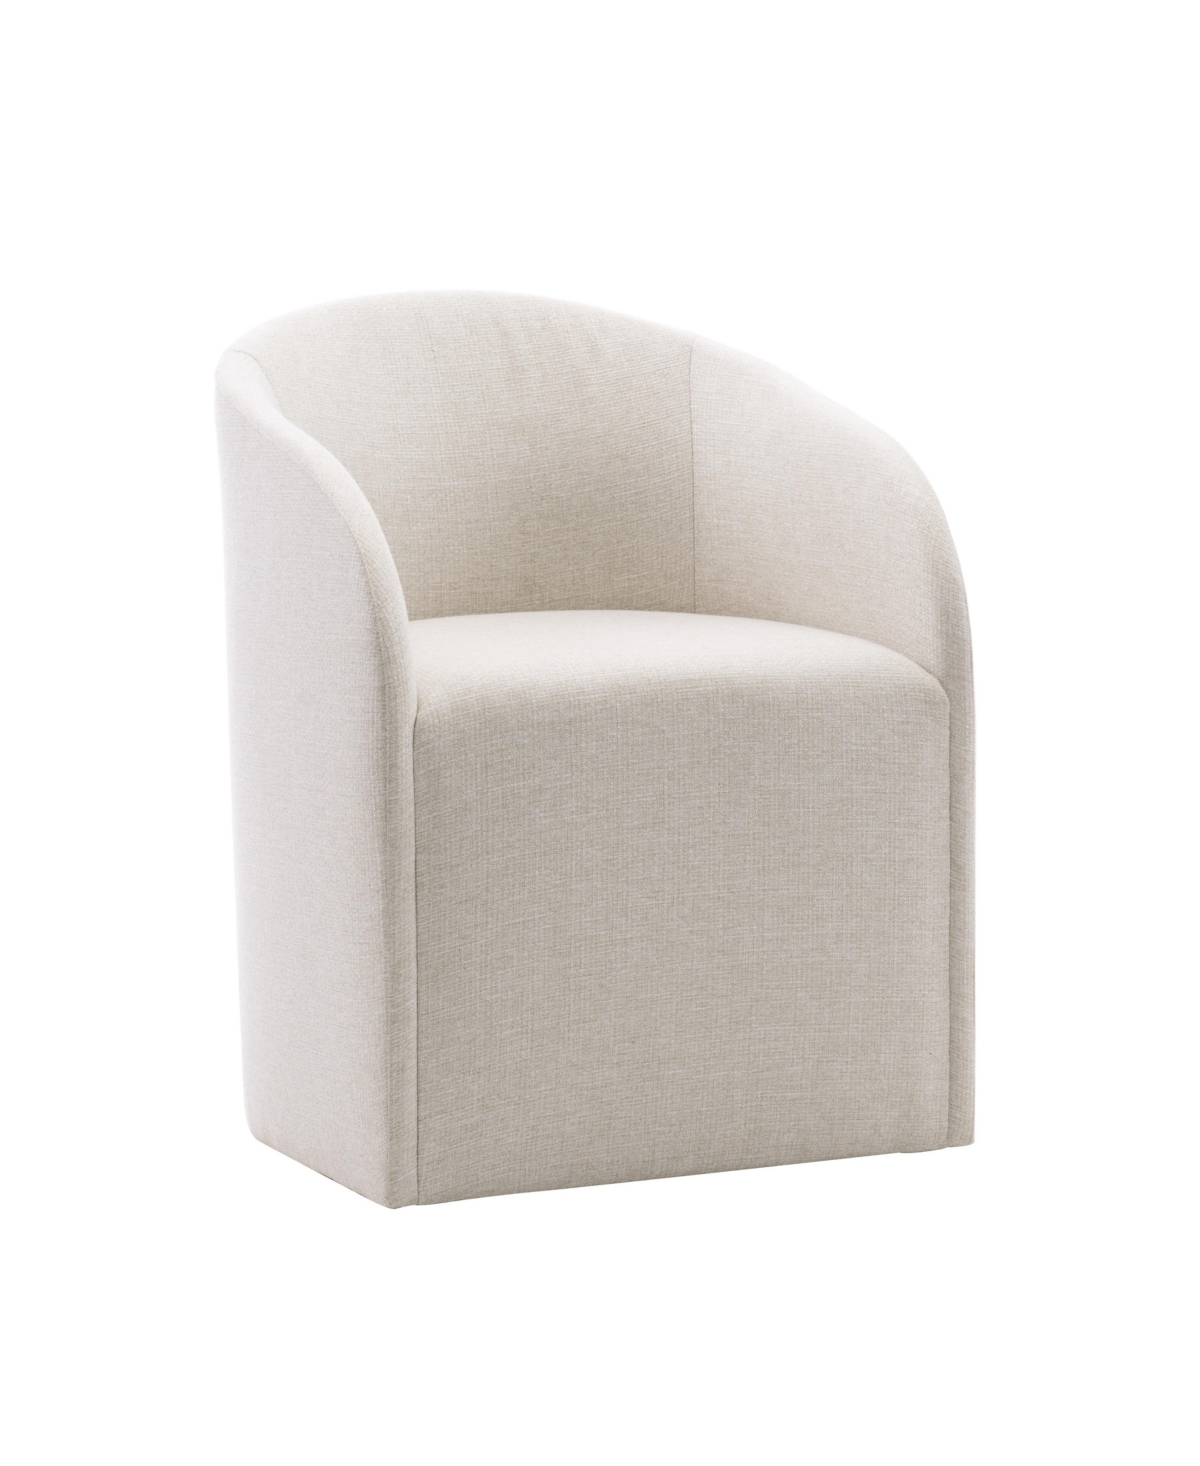 Logan Square castered arm chair, By Bernhardt